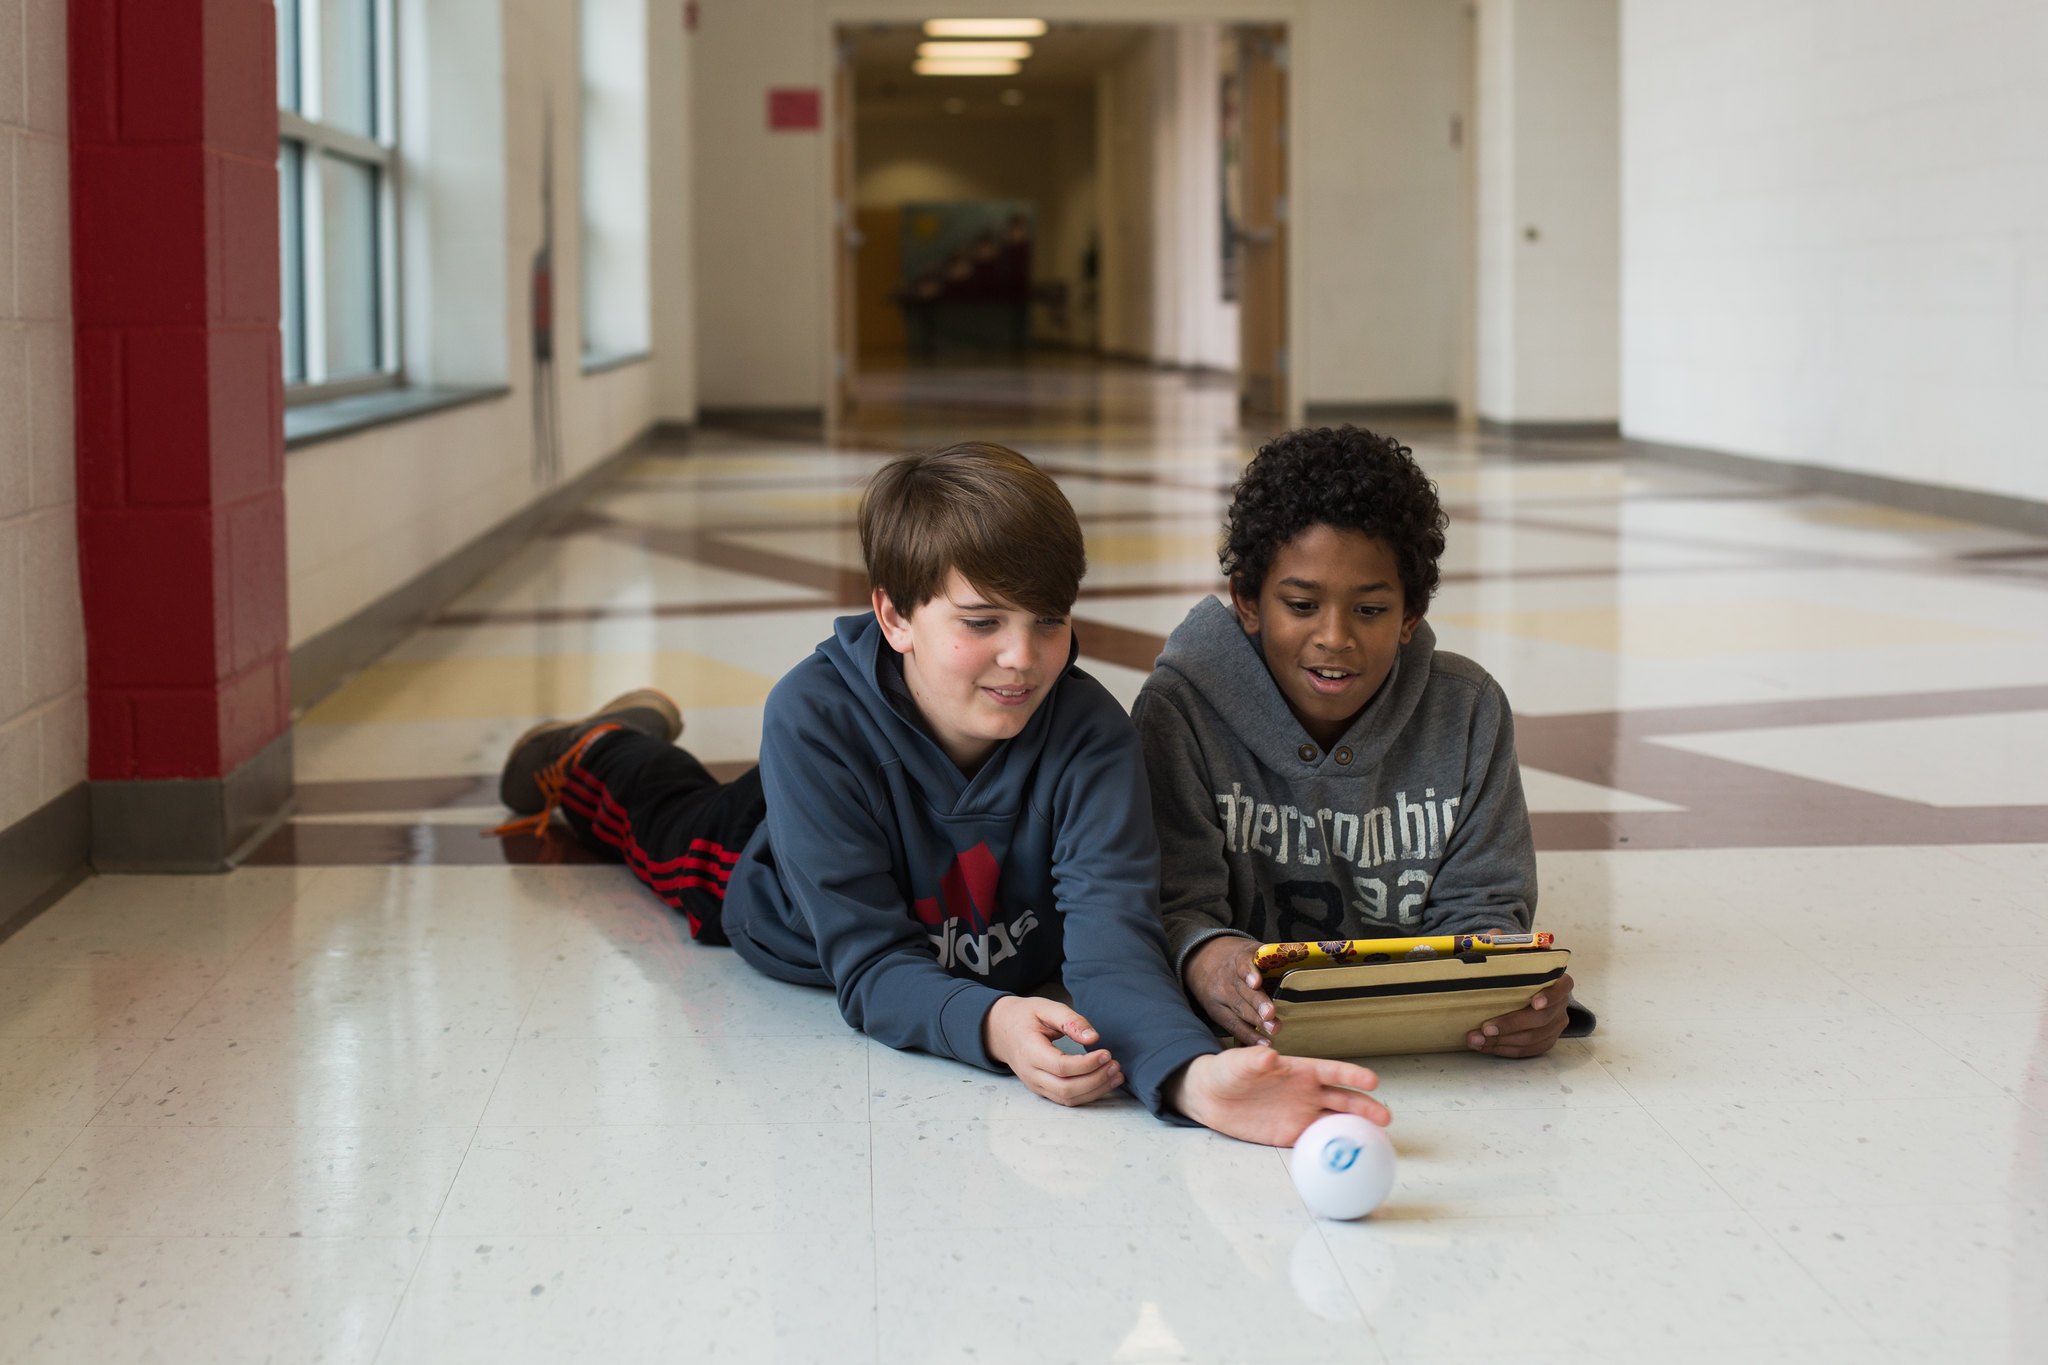 Two students lay on their stomach on the floor of a middle school hallway while playing with a spherical robot.